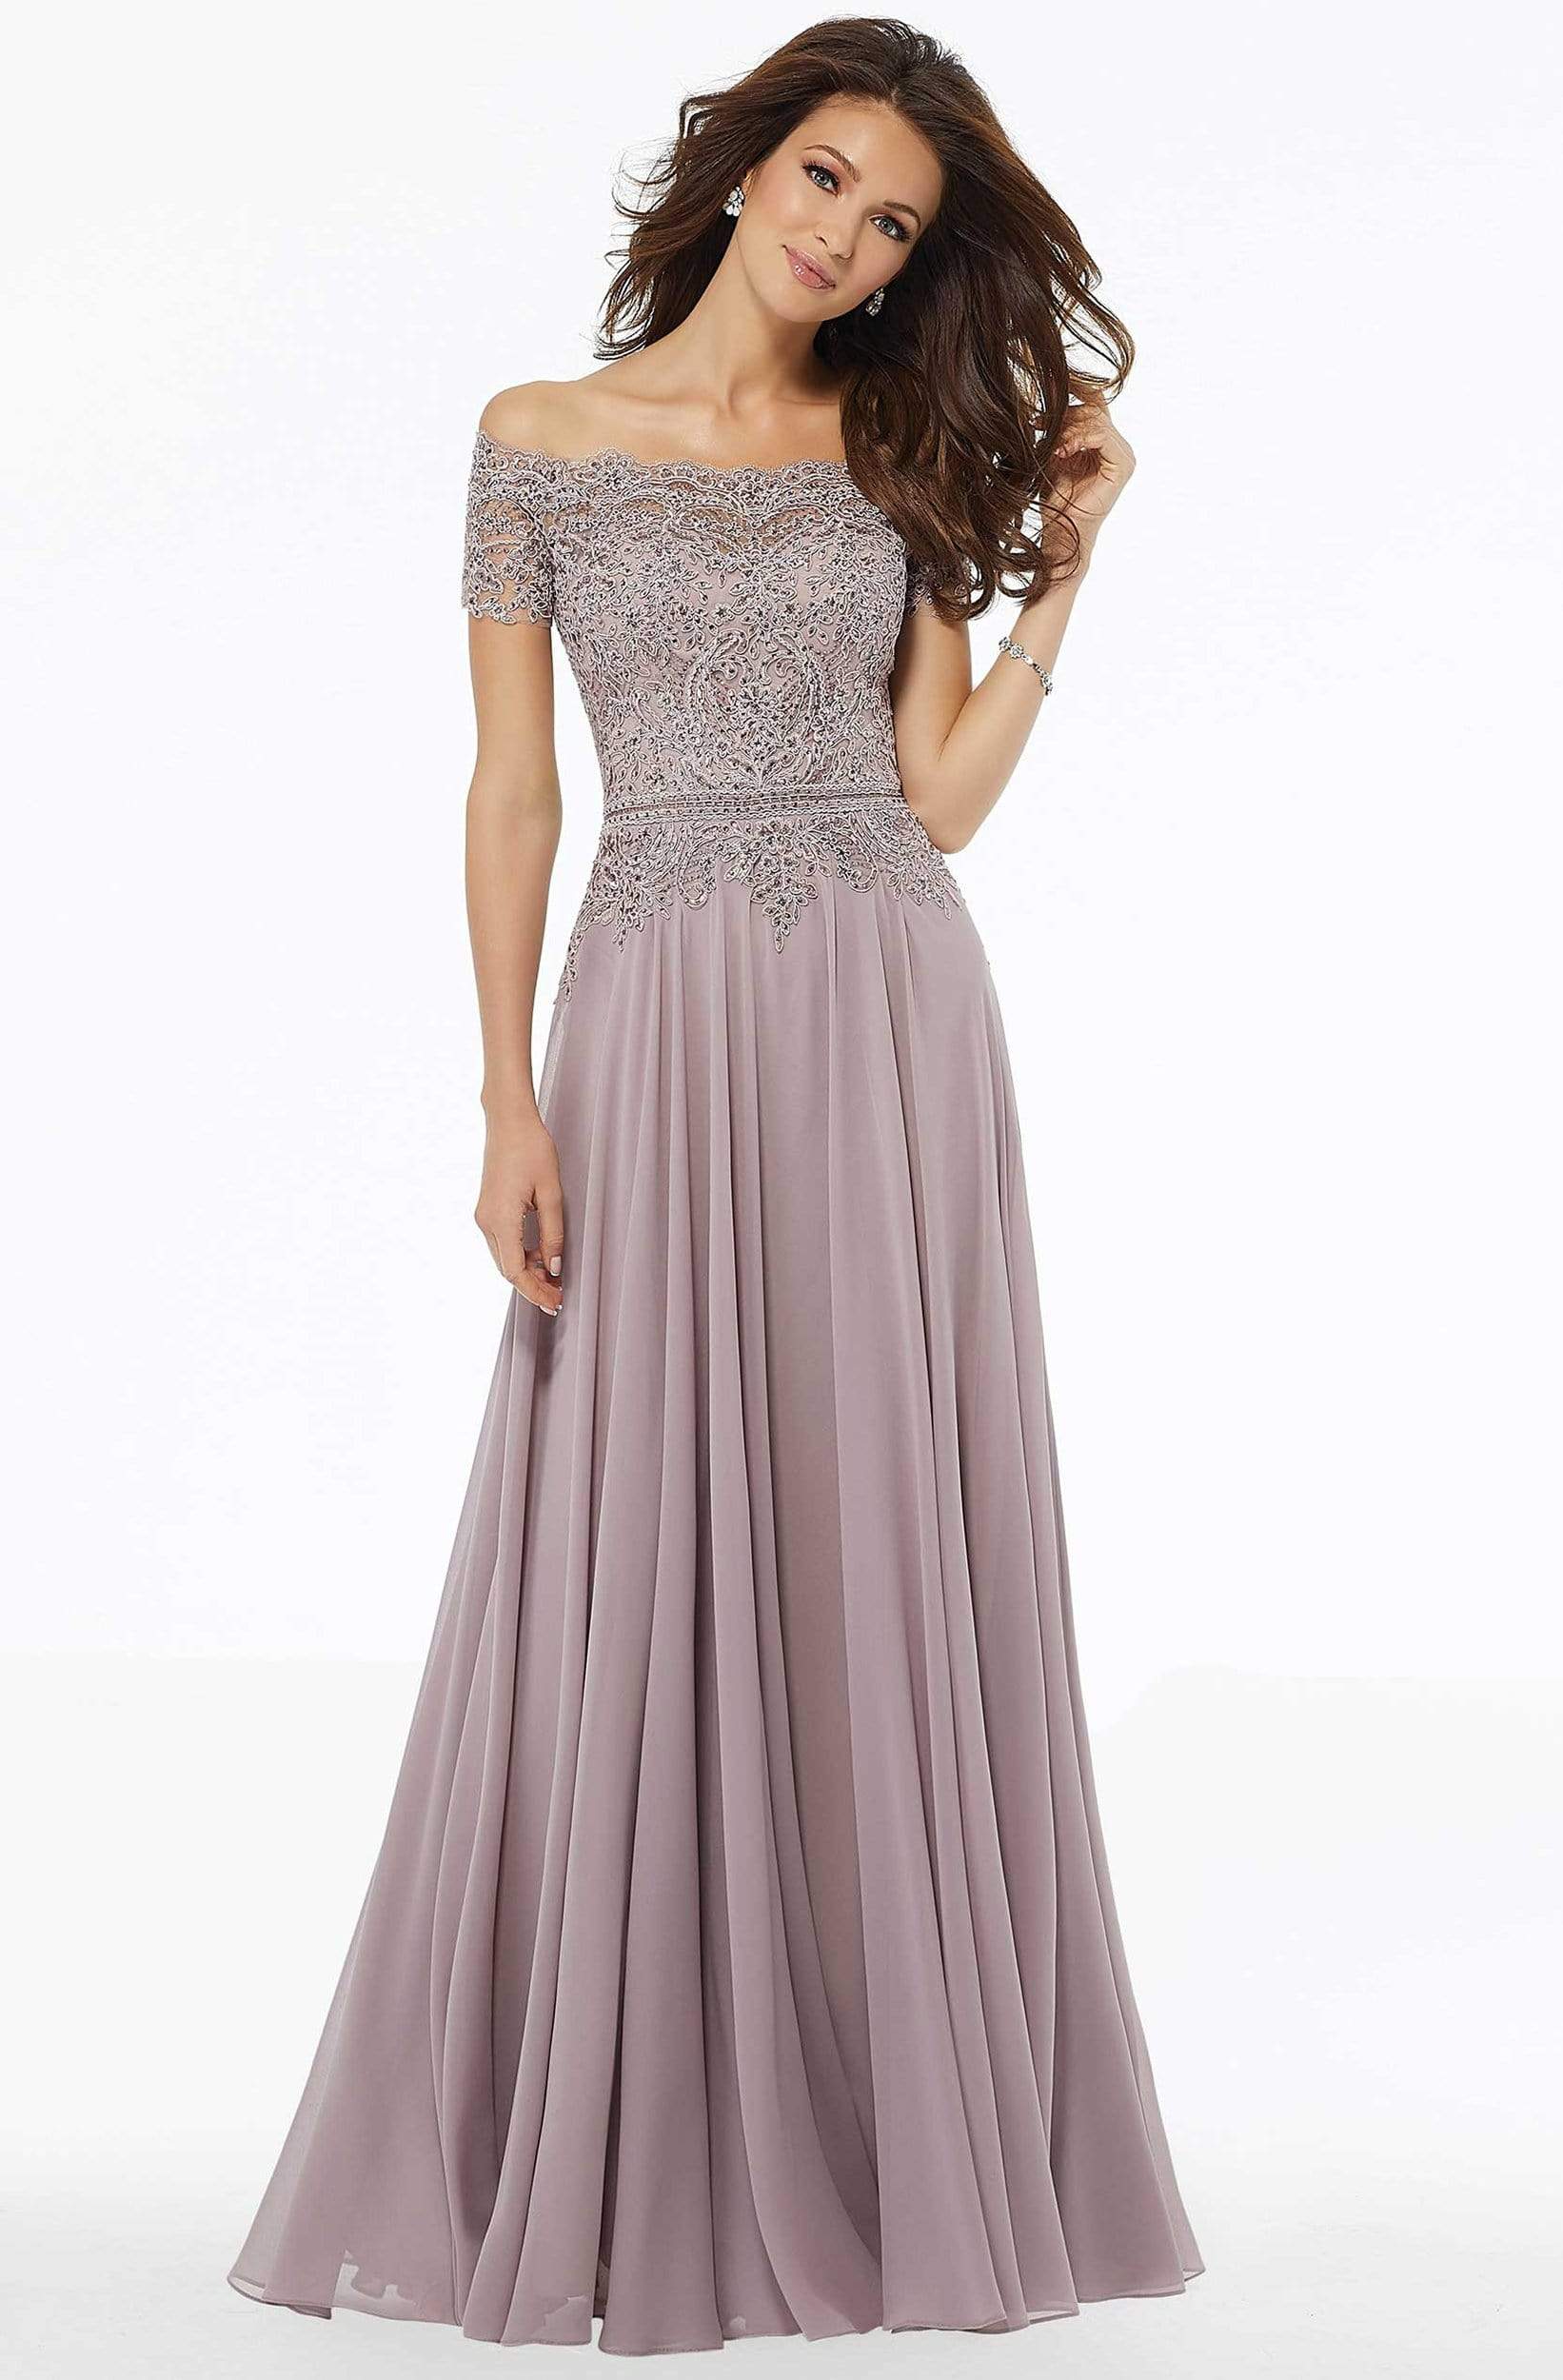 Image of MGNY By Mori Lee - 72133 Off Shoulder Lace Appliqued Chiffon Dress